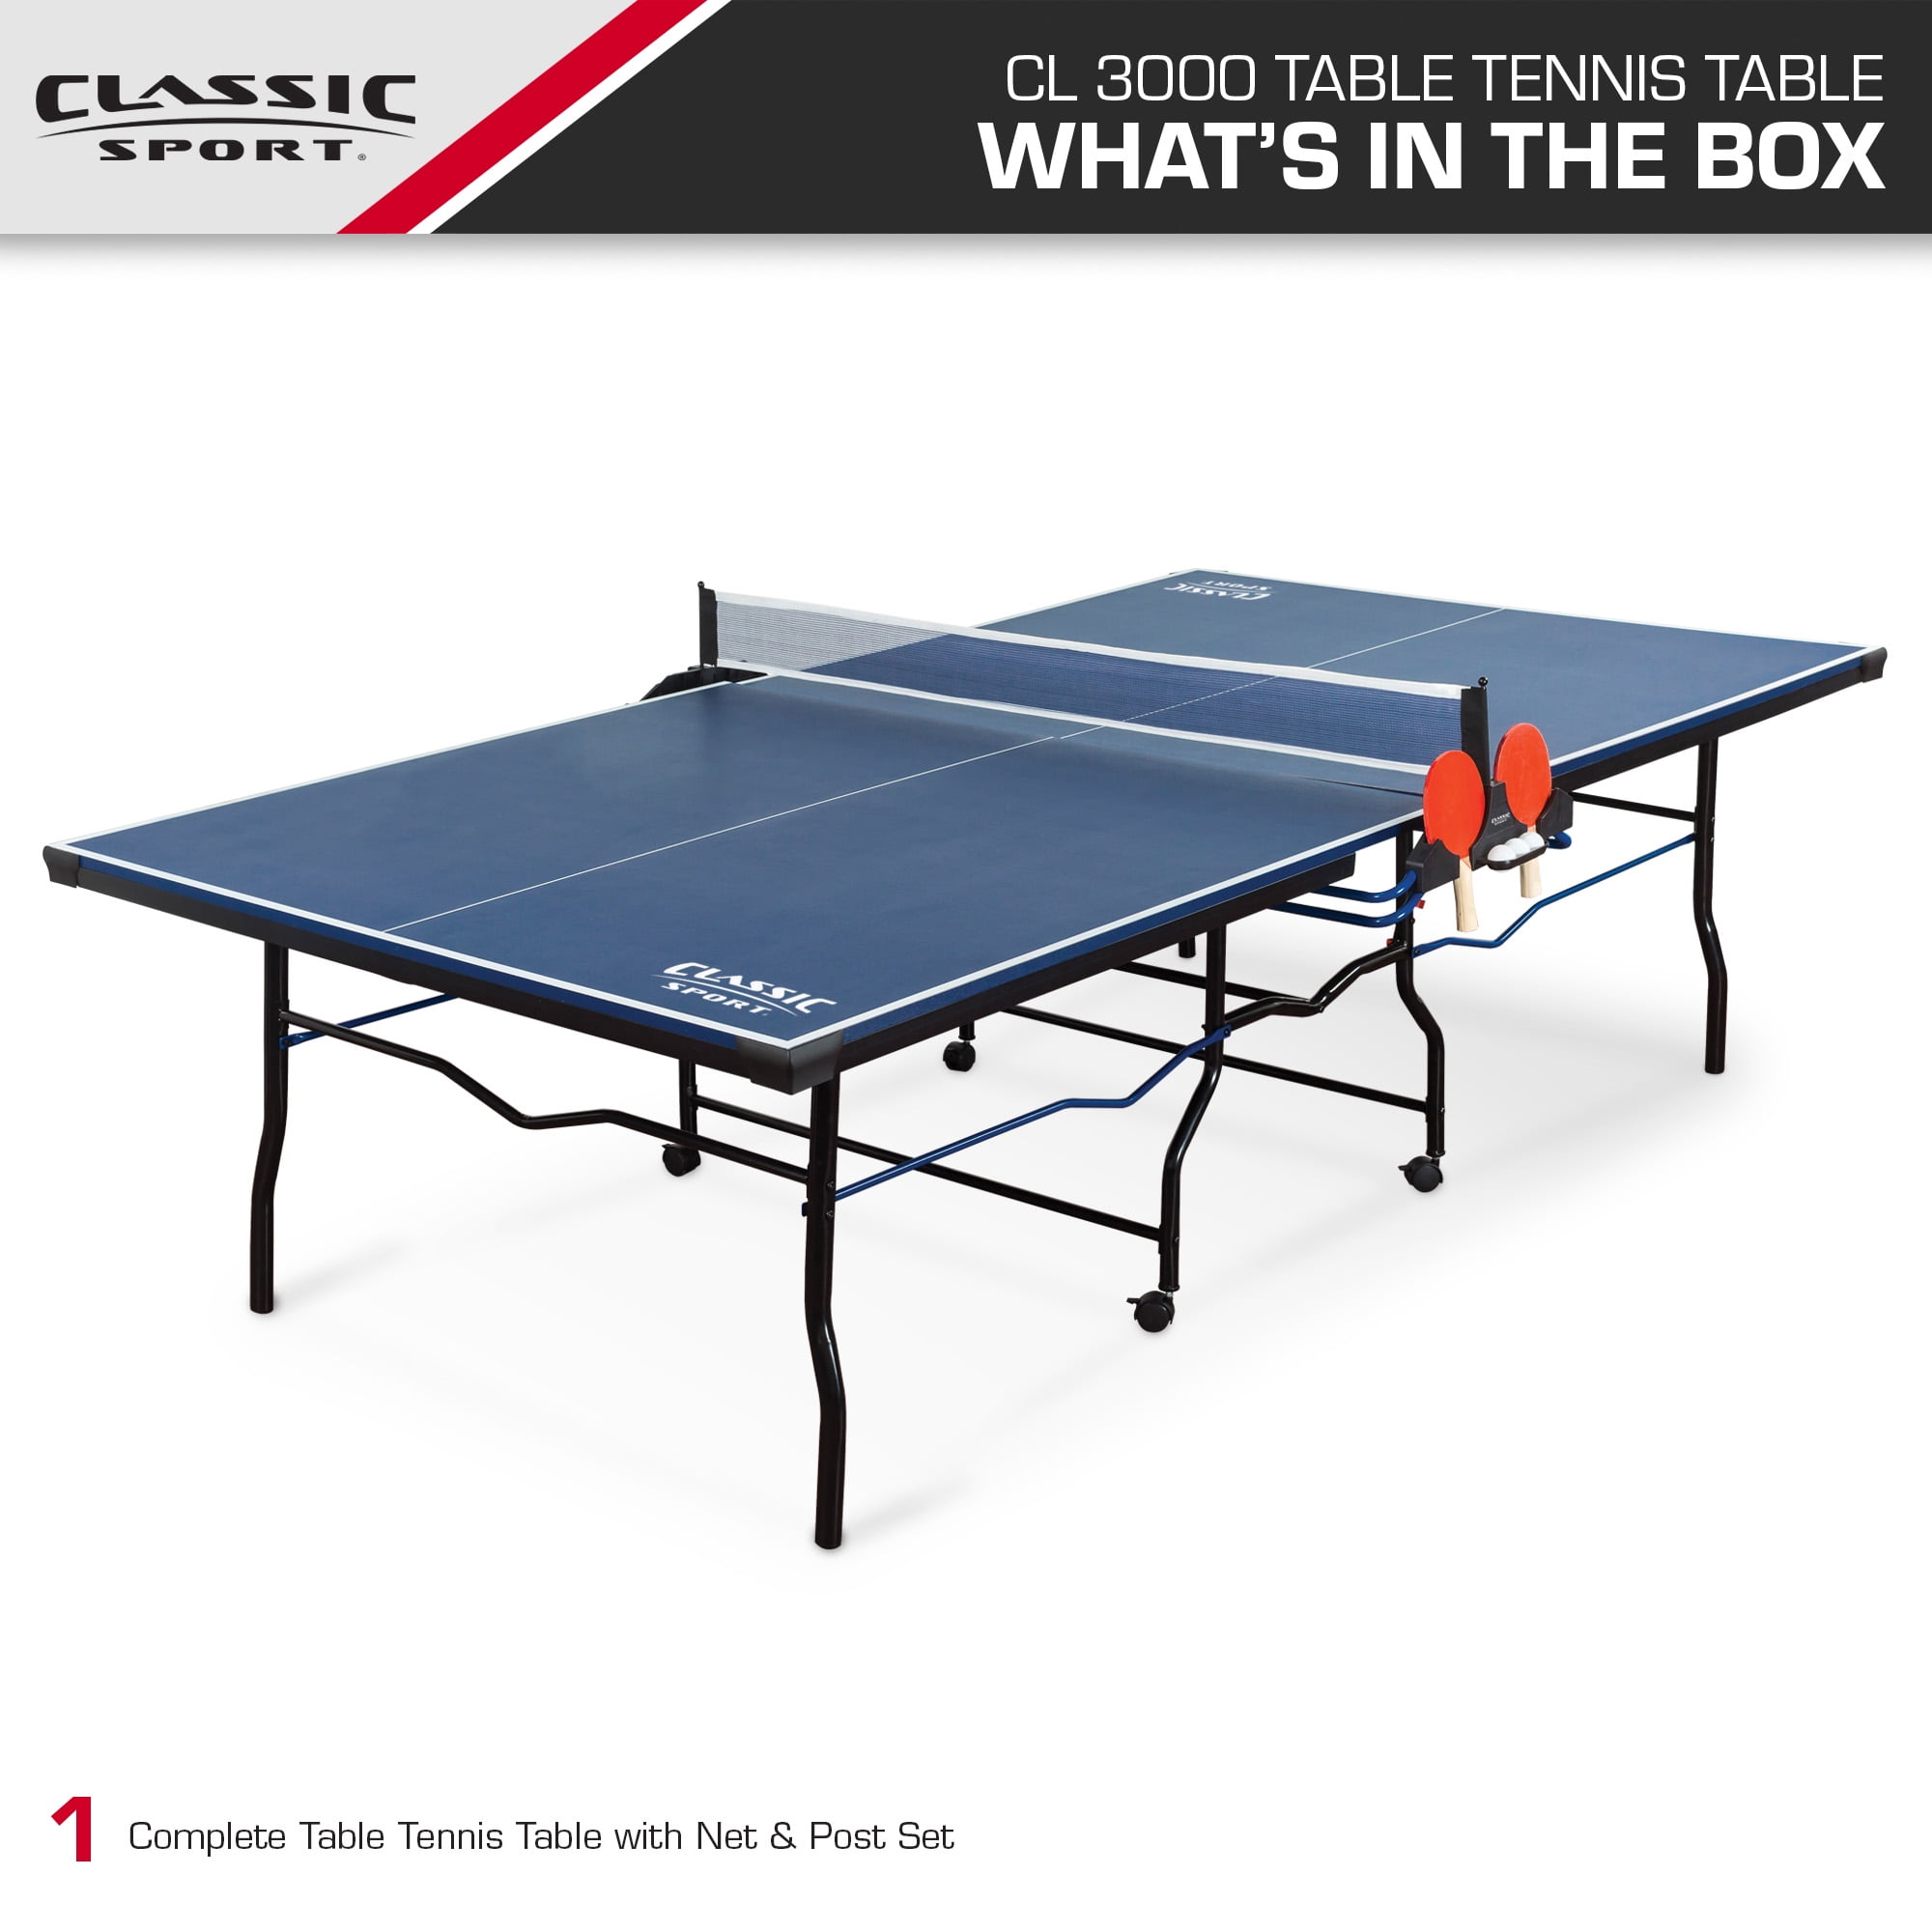 Quality family table tennis set from the Evolve range. Integra from Evolve Including 2 bats 3 balls and a FREE carry case Table Tennis Bat Set